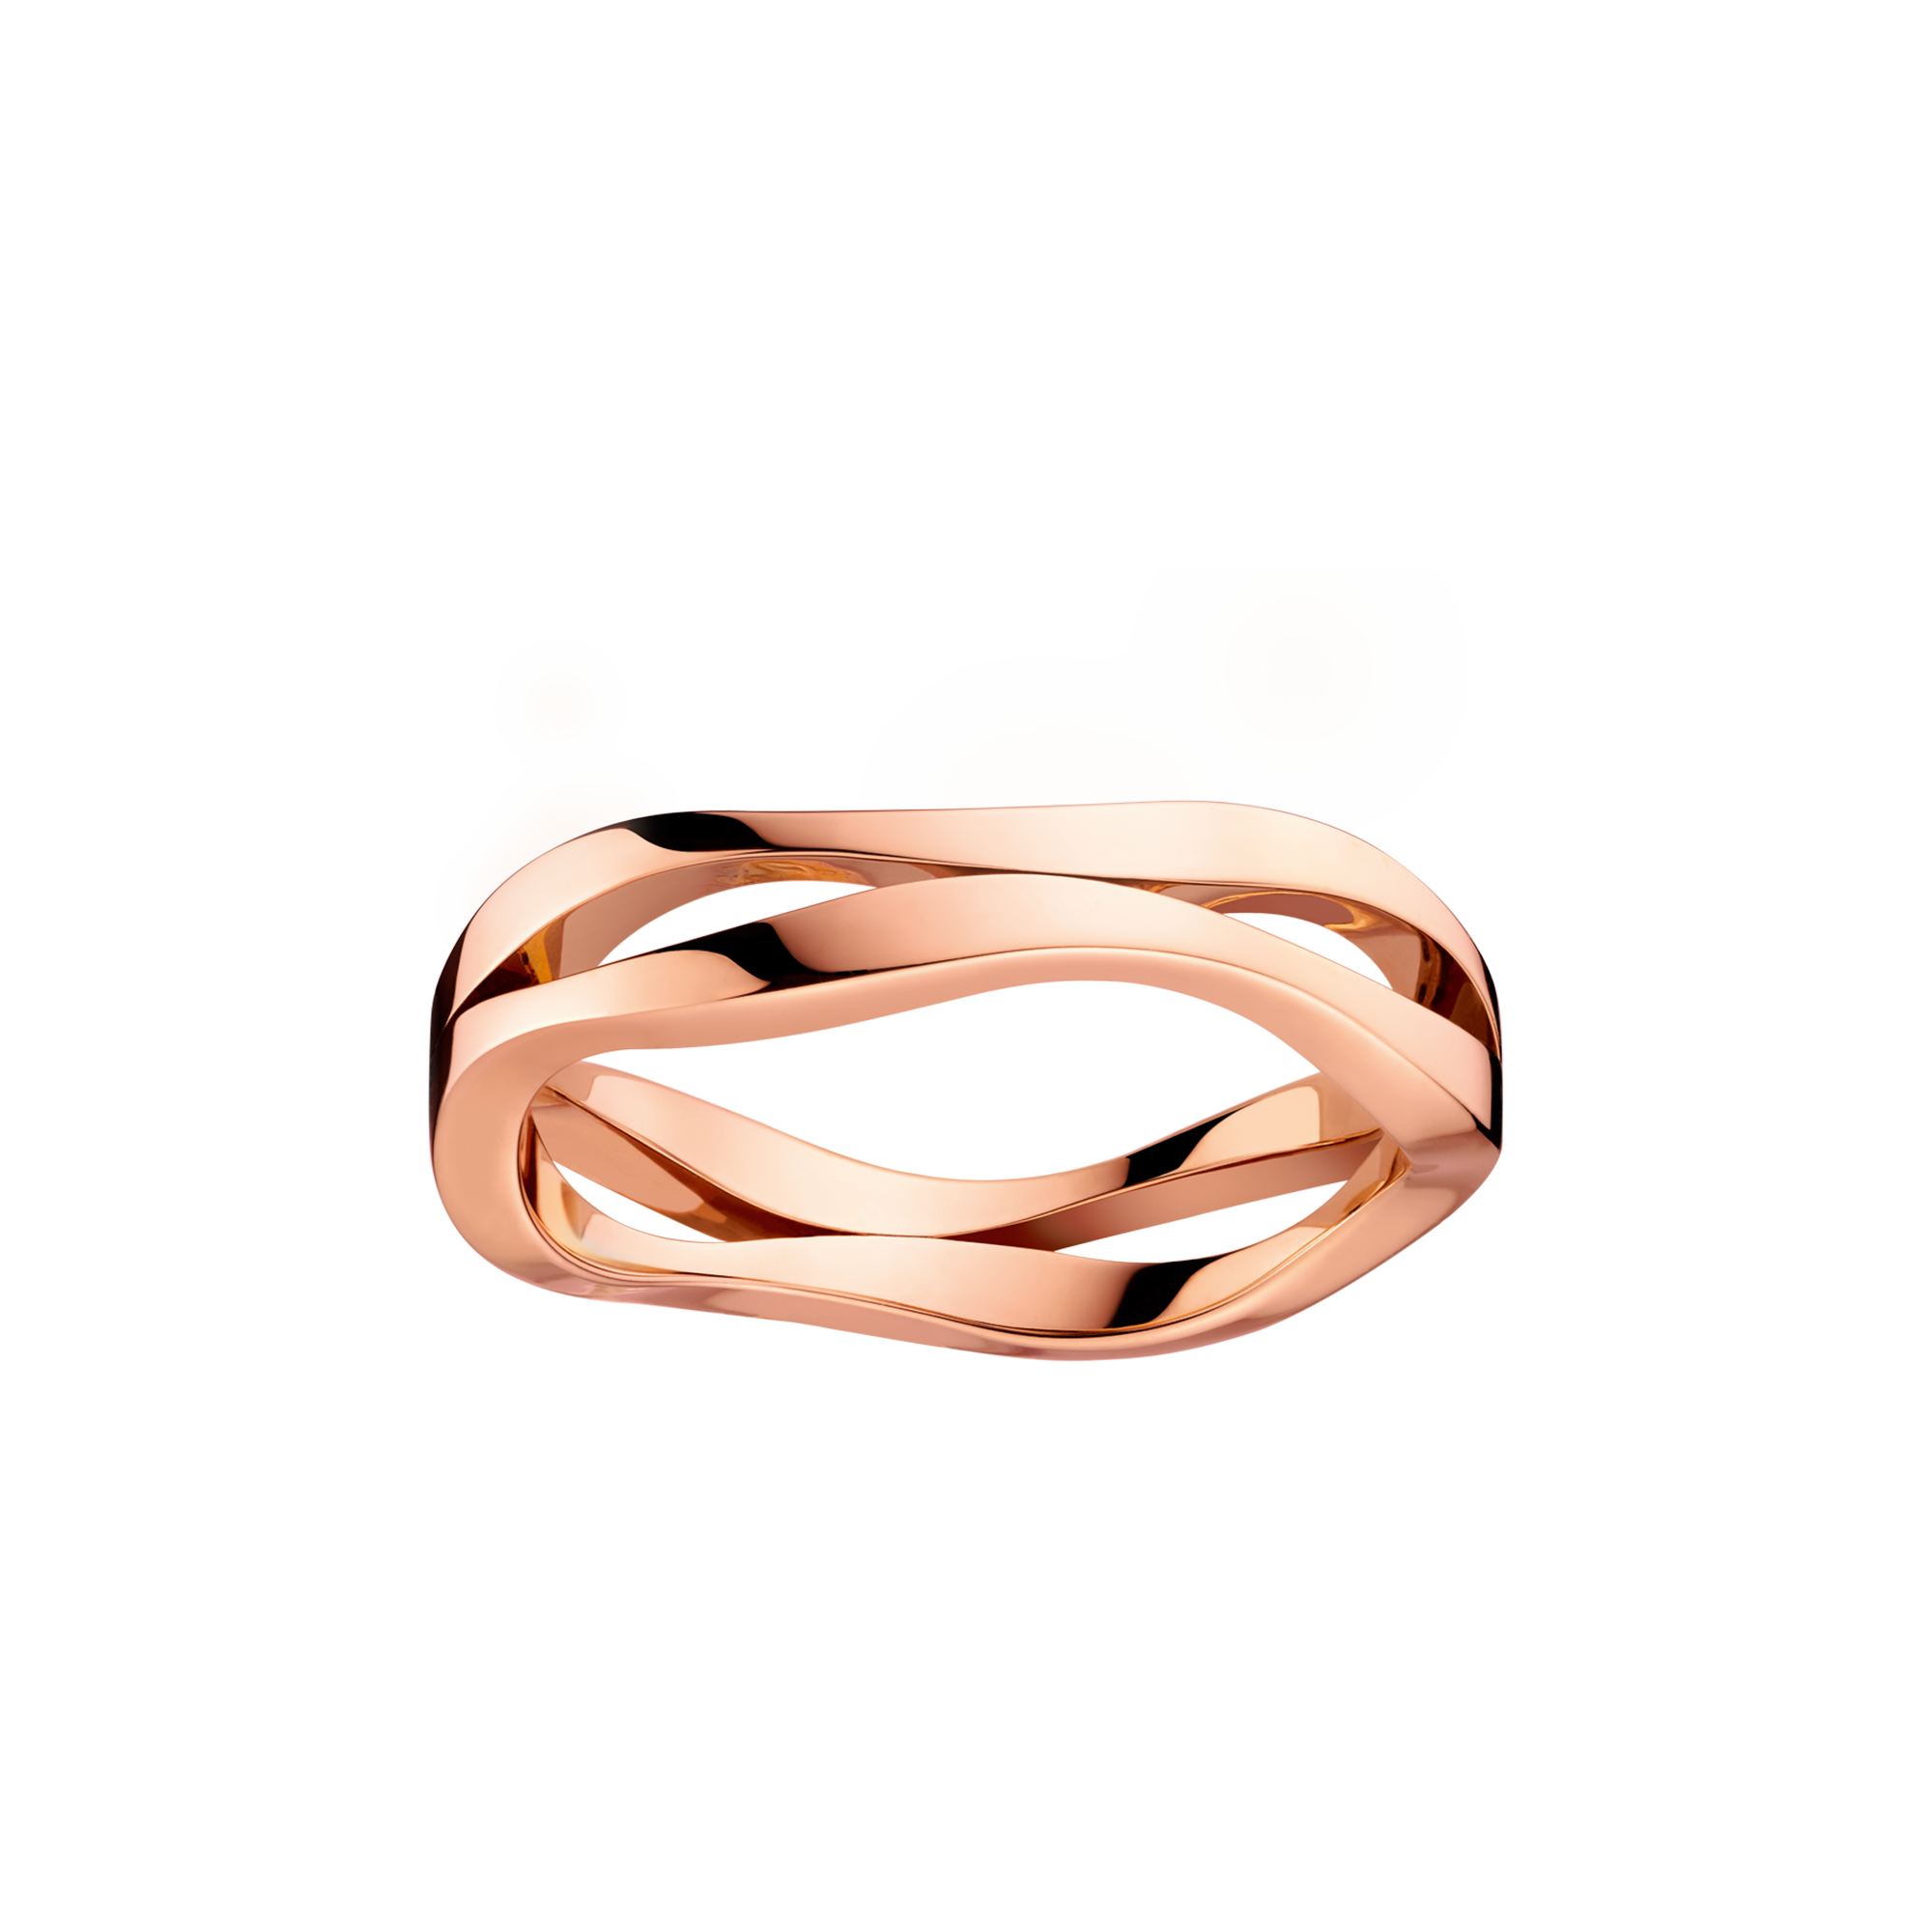 Ladymatic Ring, 18K red gold